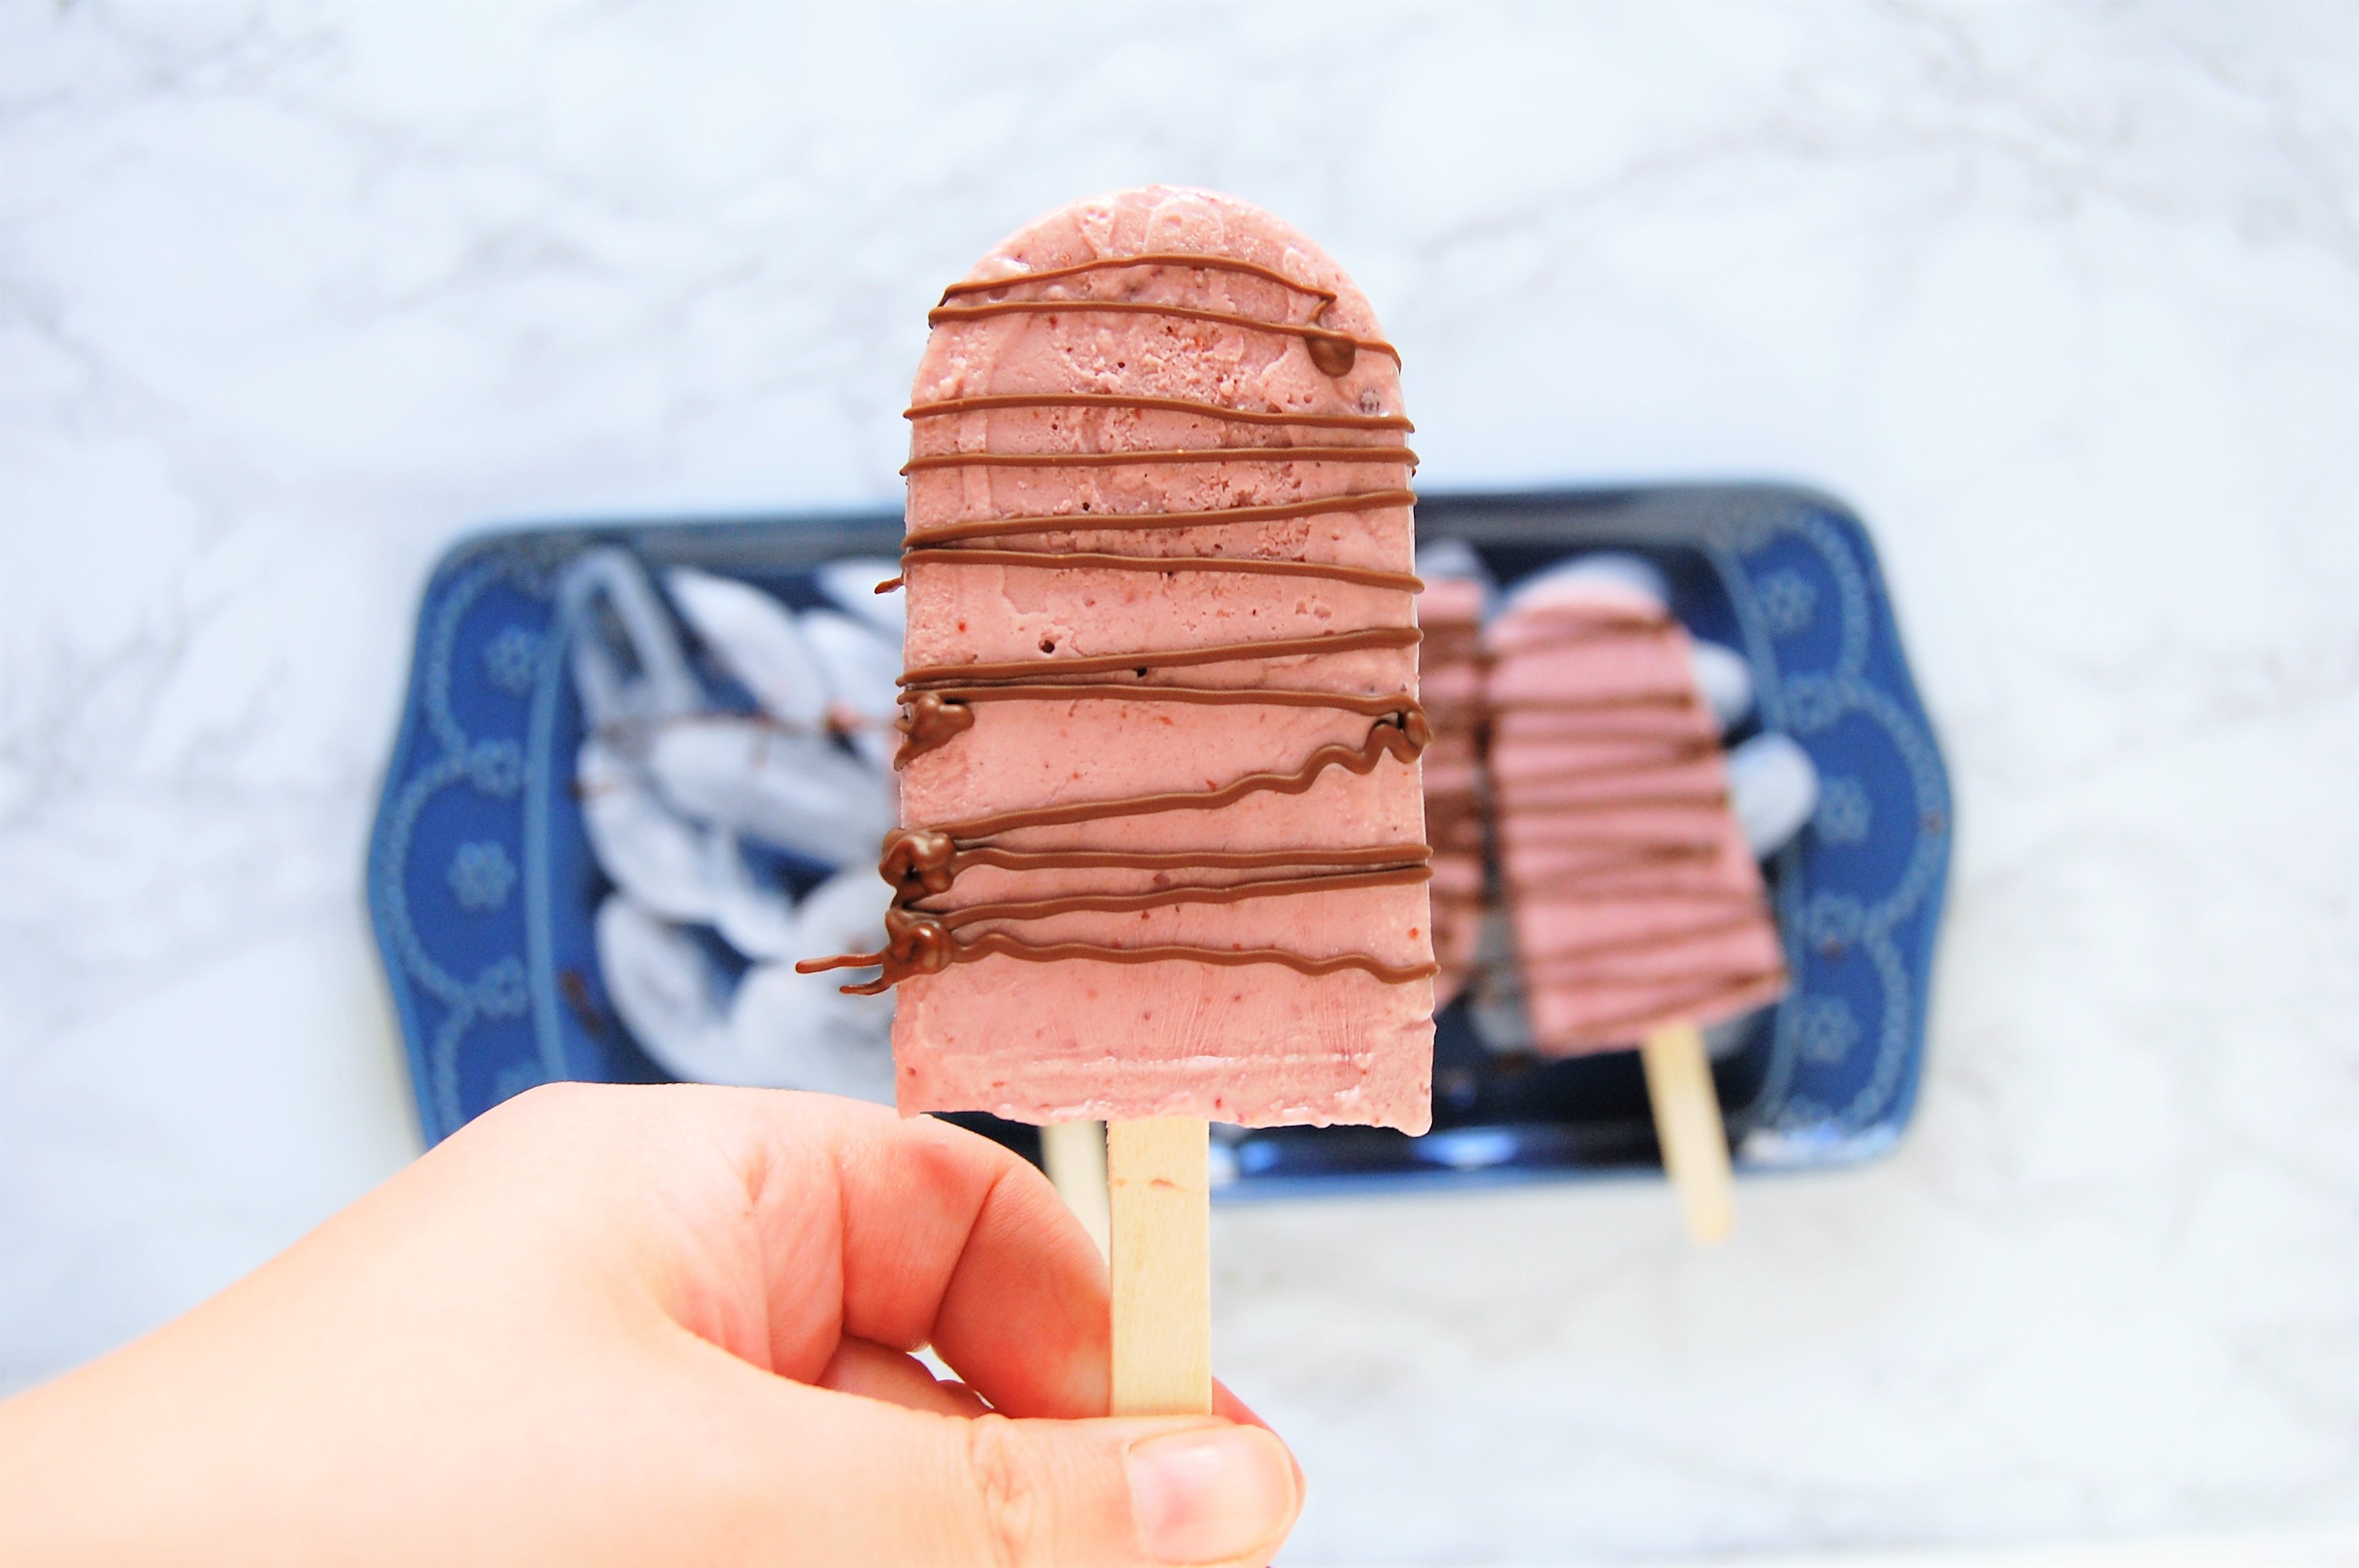 Cherry Cheesecake Protein Pops are a healthy treat recipe, easy to make with just four ingredients! This is a refreshing treat packed with fruit and protein, perfect for the whole family this summertime! | recipe, healthy recipe, healthy dessert, protein dessert, easy recipe, cherries, cheesecake, popsicle, nutrition, dietitian |